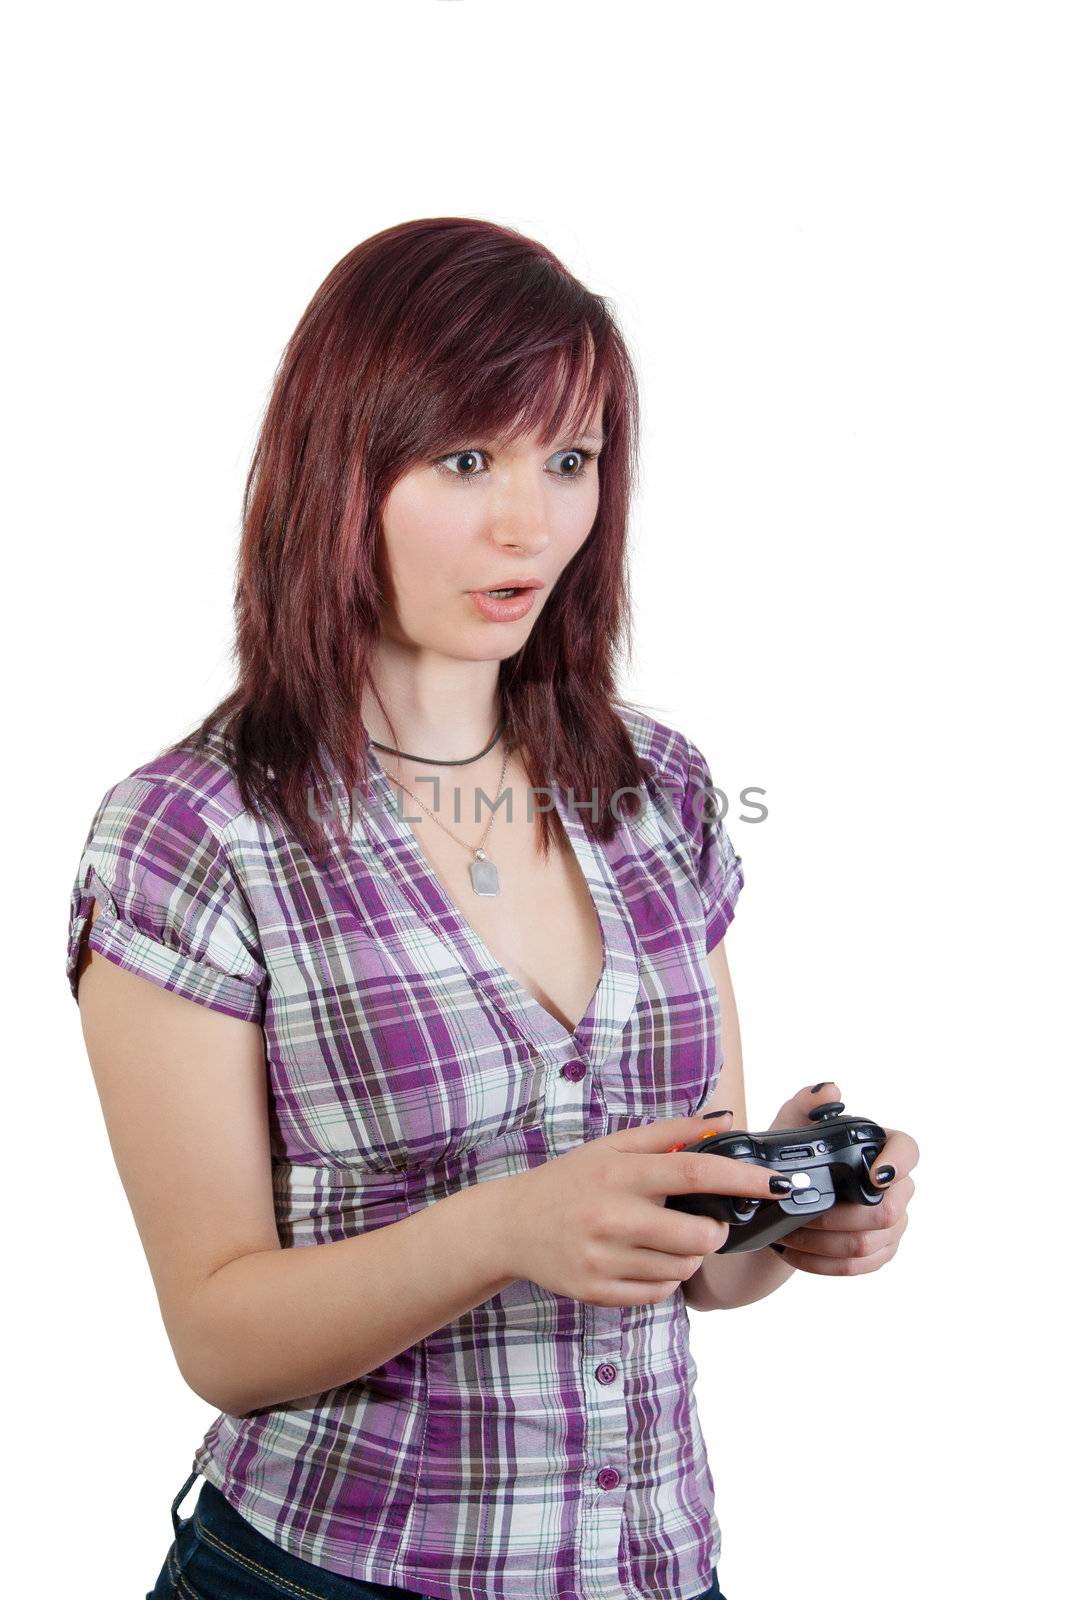 woman playing video game with joypad